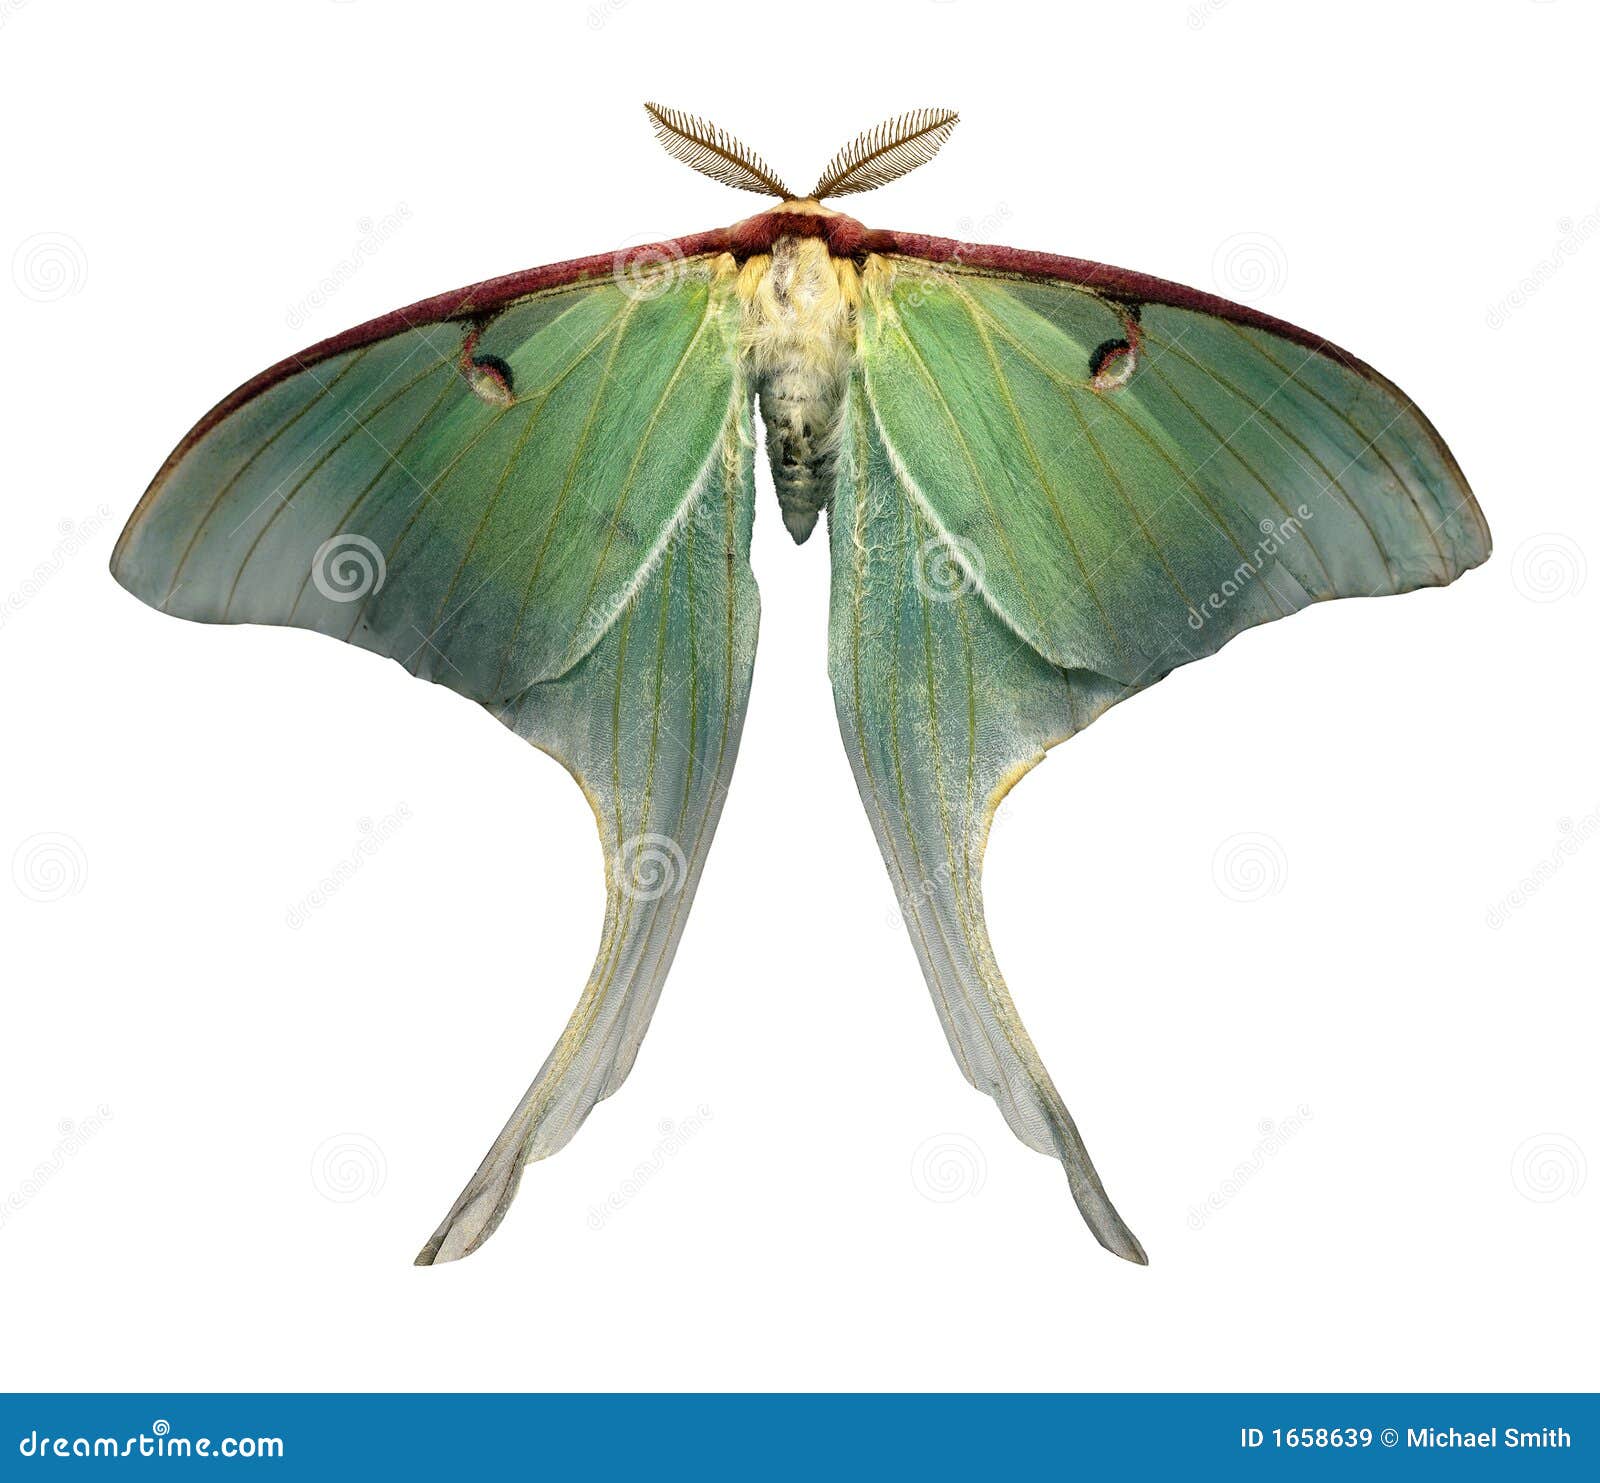 luna moth is a rare and beautiful sight